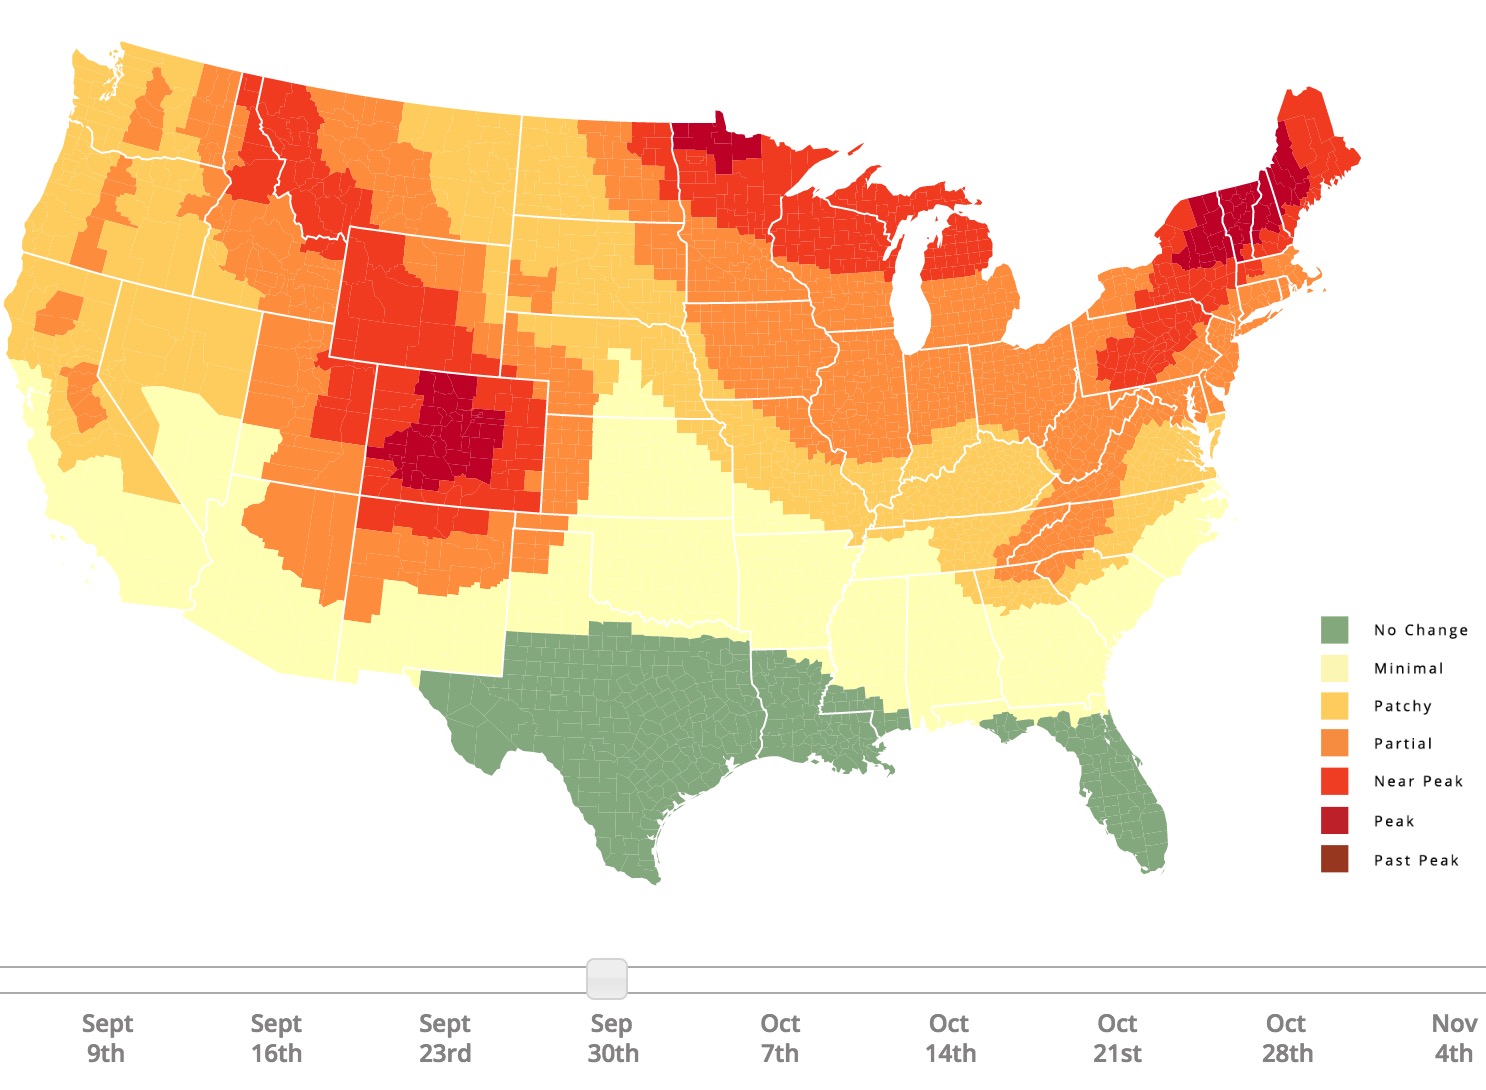 This Interactive Map Predicts When Fall Foliage Will Peak Across The U